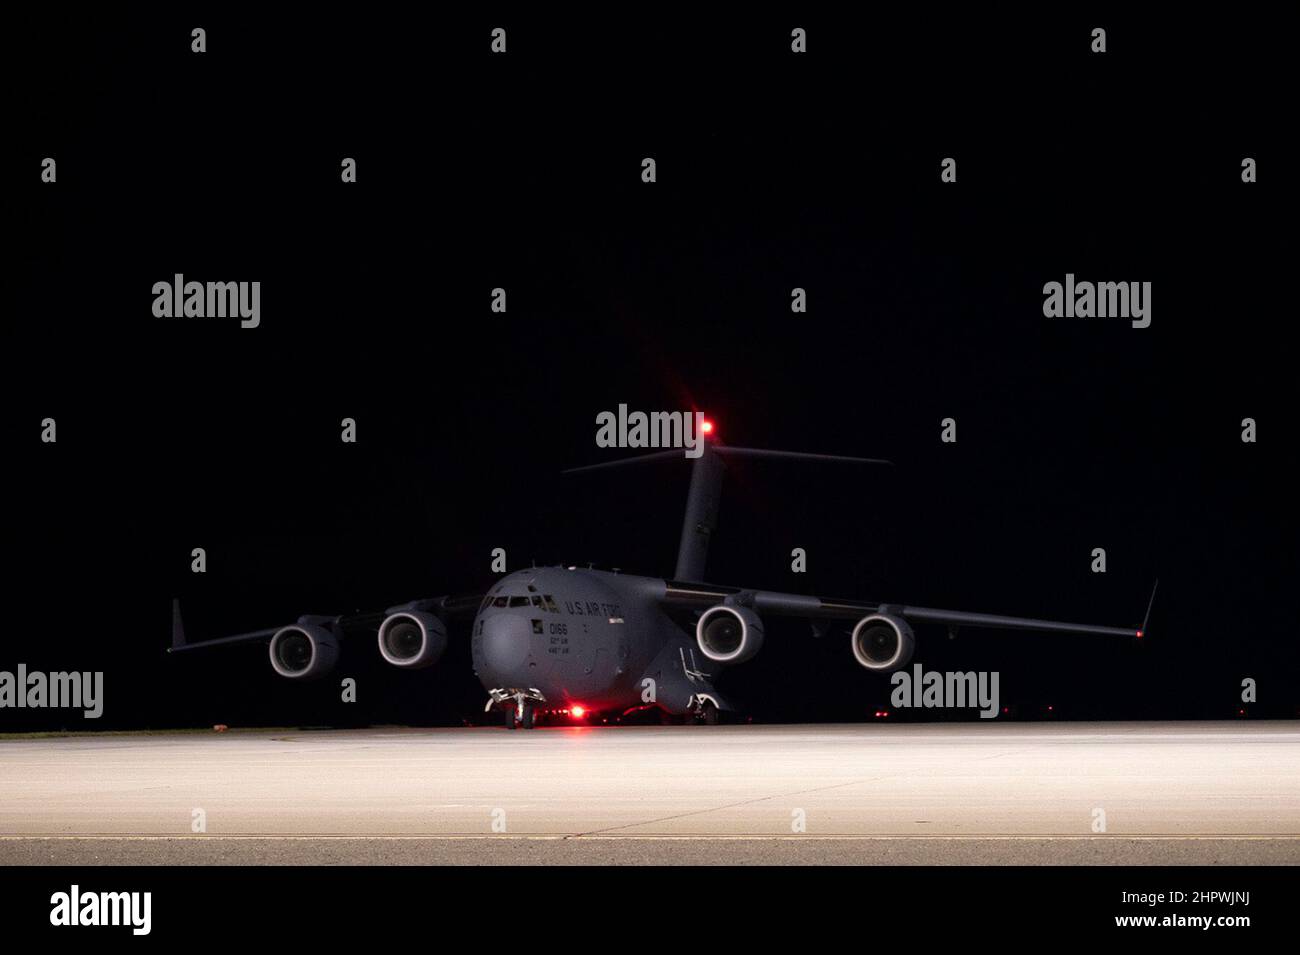 A C-17 Globemaster III assigned to Joint Base Lewis-McChord, Washington, arrives at Travis Air Force Base, California, Feb. 14, 2022. U.S. Airmen with the 60th Aerial Port Squadron and 8th Airlift Squadron load K-loaders onto the C-17. K-loaders are used to transport cargo into and out of aircraft. Under the direction of U.S. Transportation Command, the 60th Air Mobility Wing supported the 621st Contingency Response Wing during the movement of security assistance cargo to Ukraine via commercial cargo aircraft. The Defense Security Cooperation Agency coordinated the effort. (U.S. Air Force phot Stock Photo